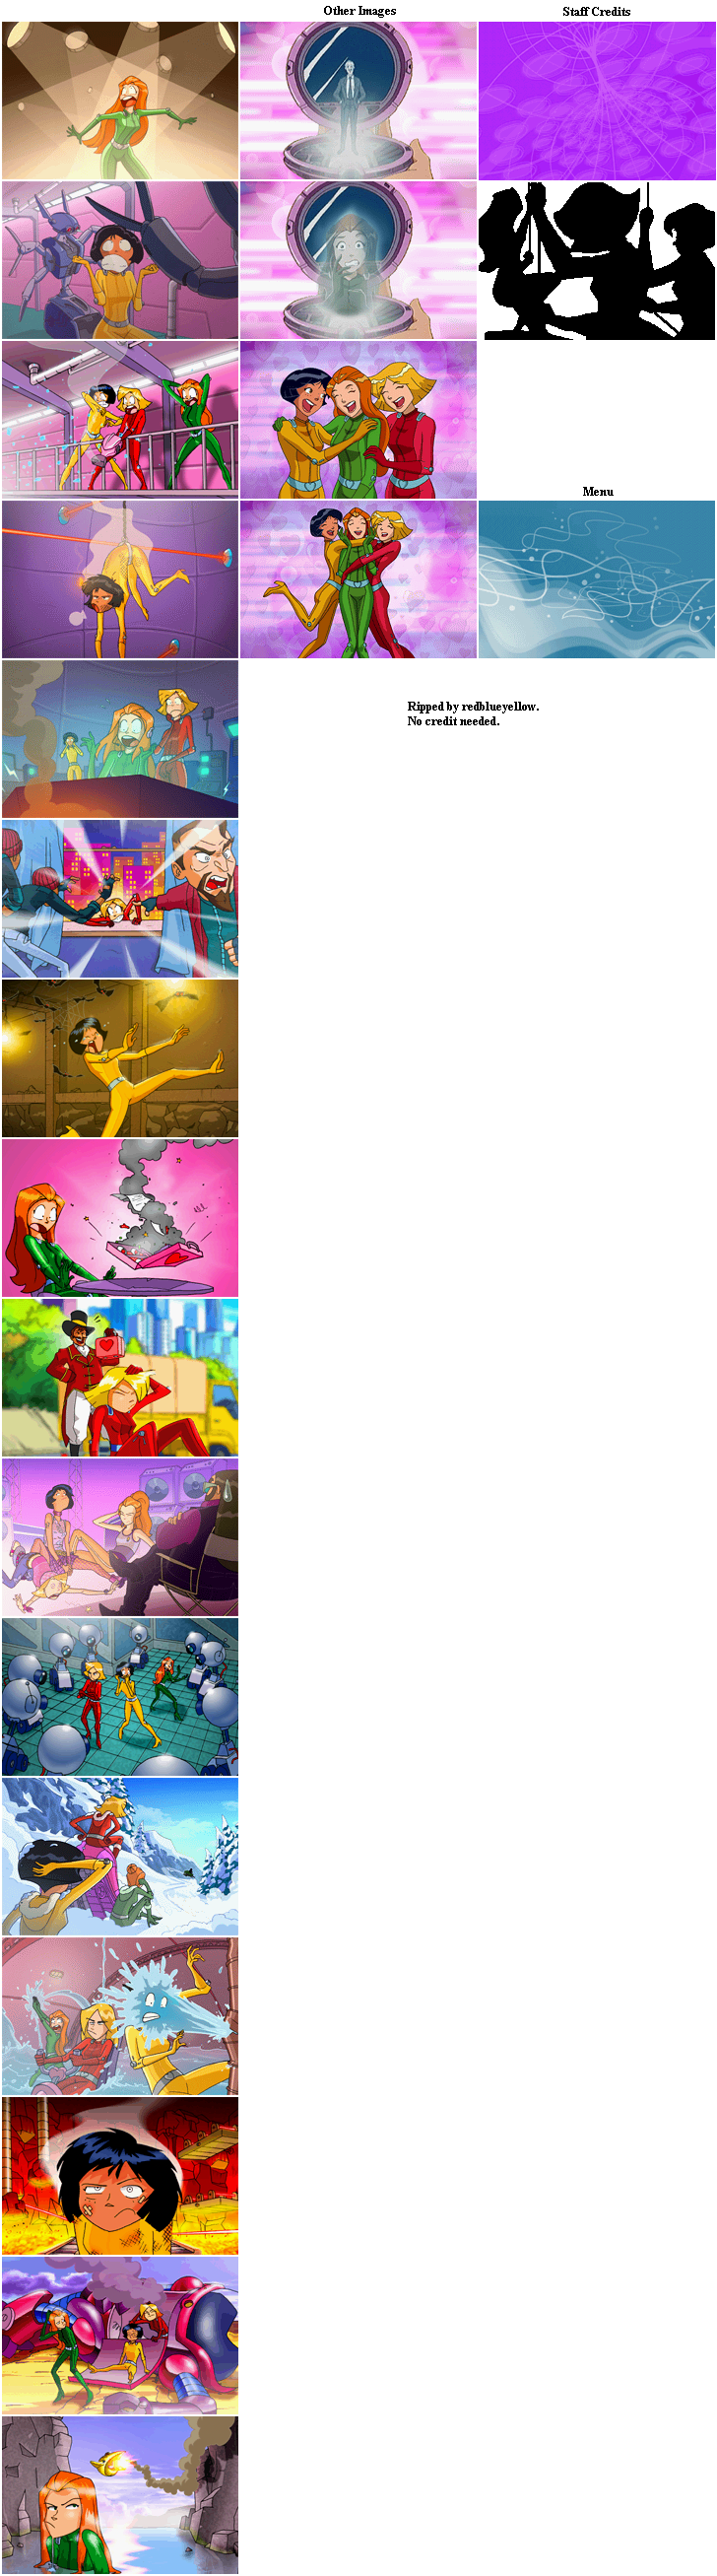 Totally Spies! - Special Gallery and Other Images